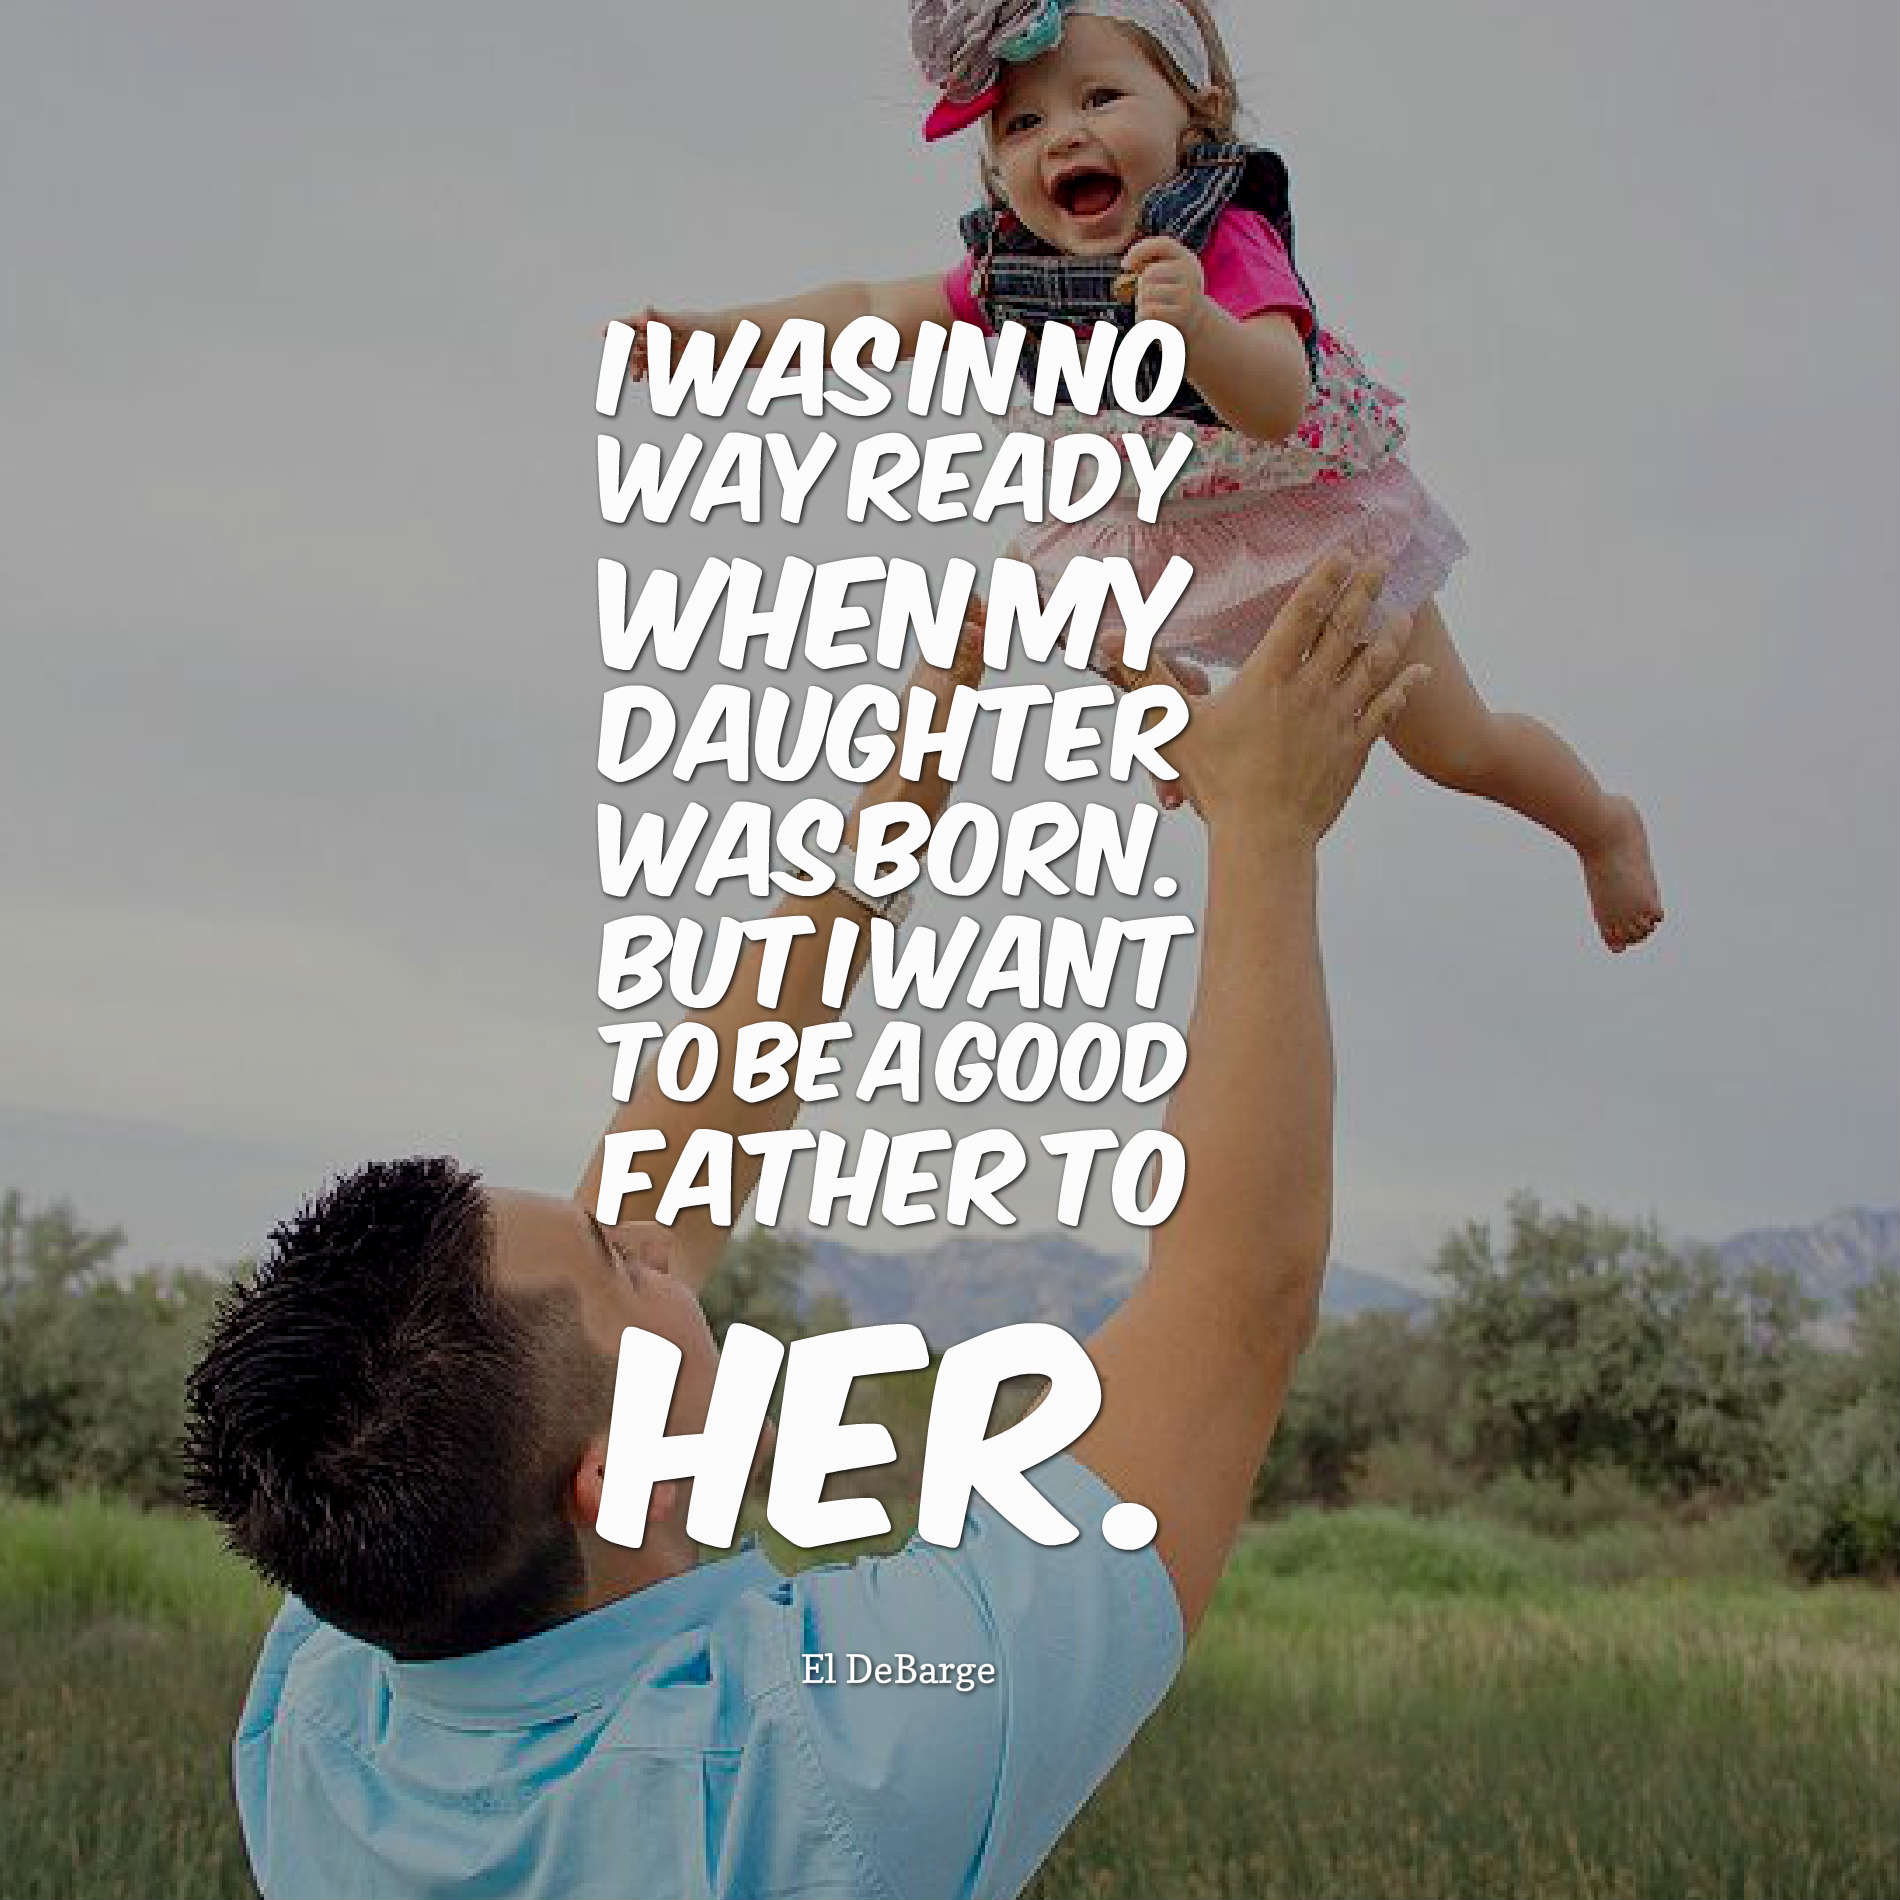 I was in no way ready when my daughter was born. But I want to be a good father to her.